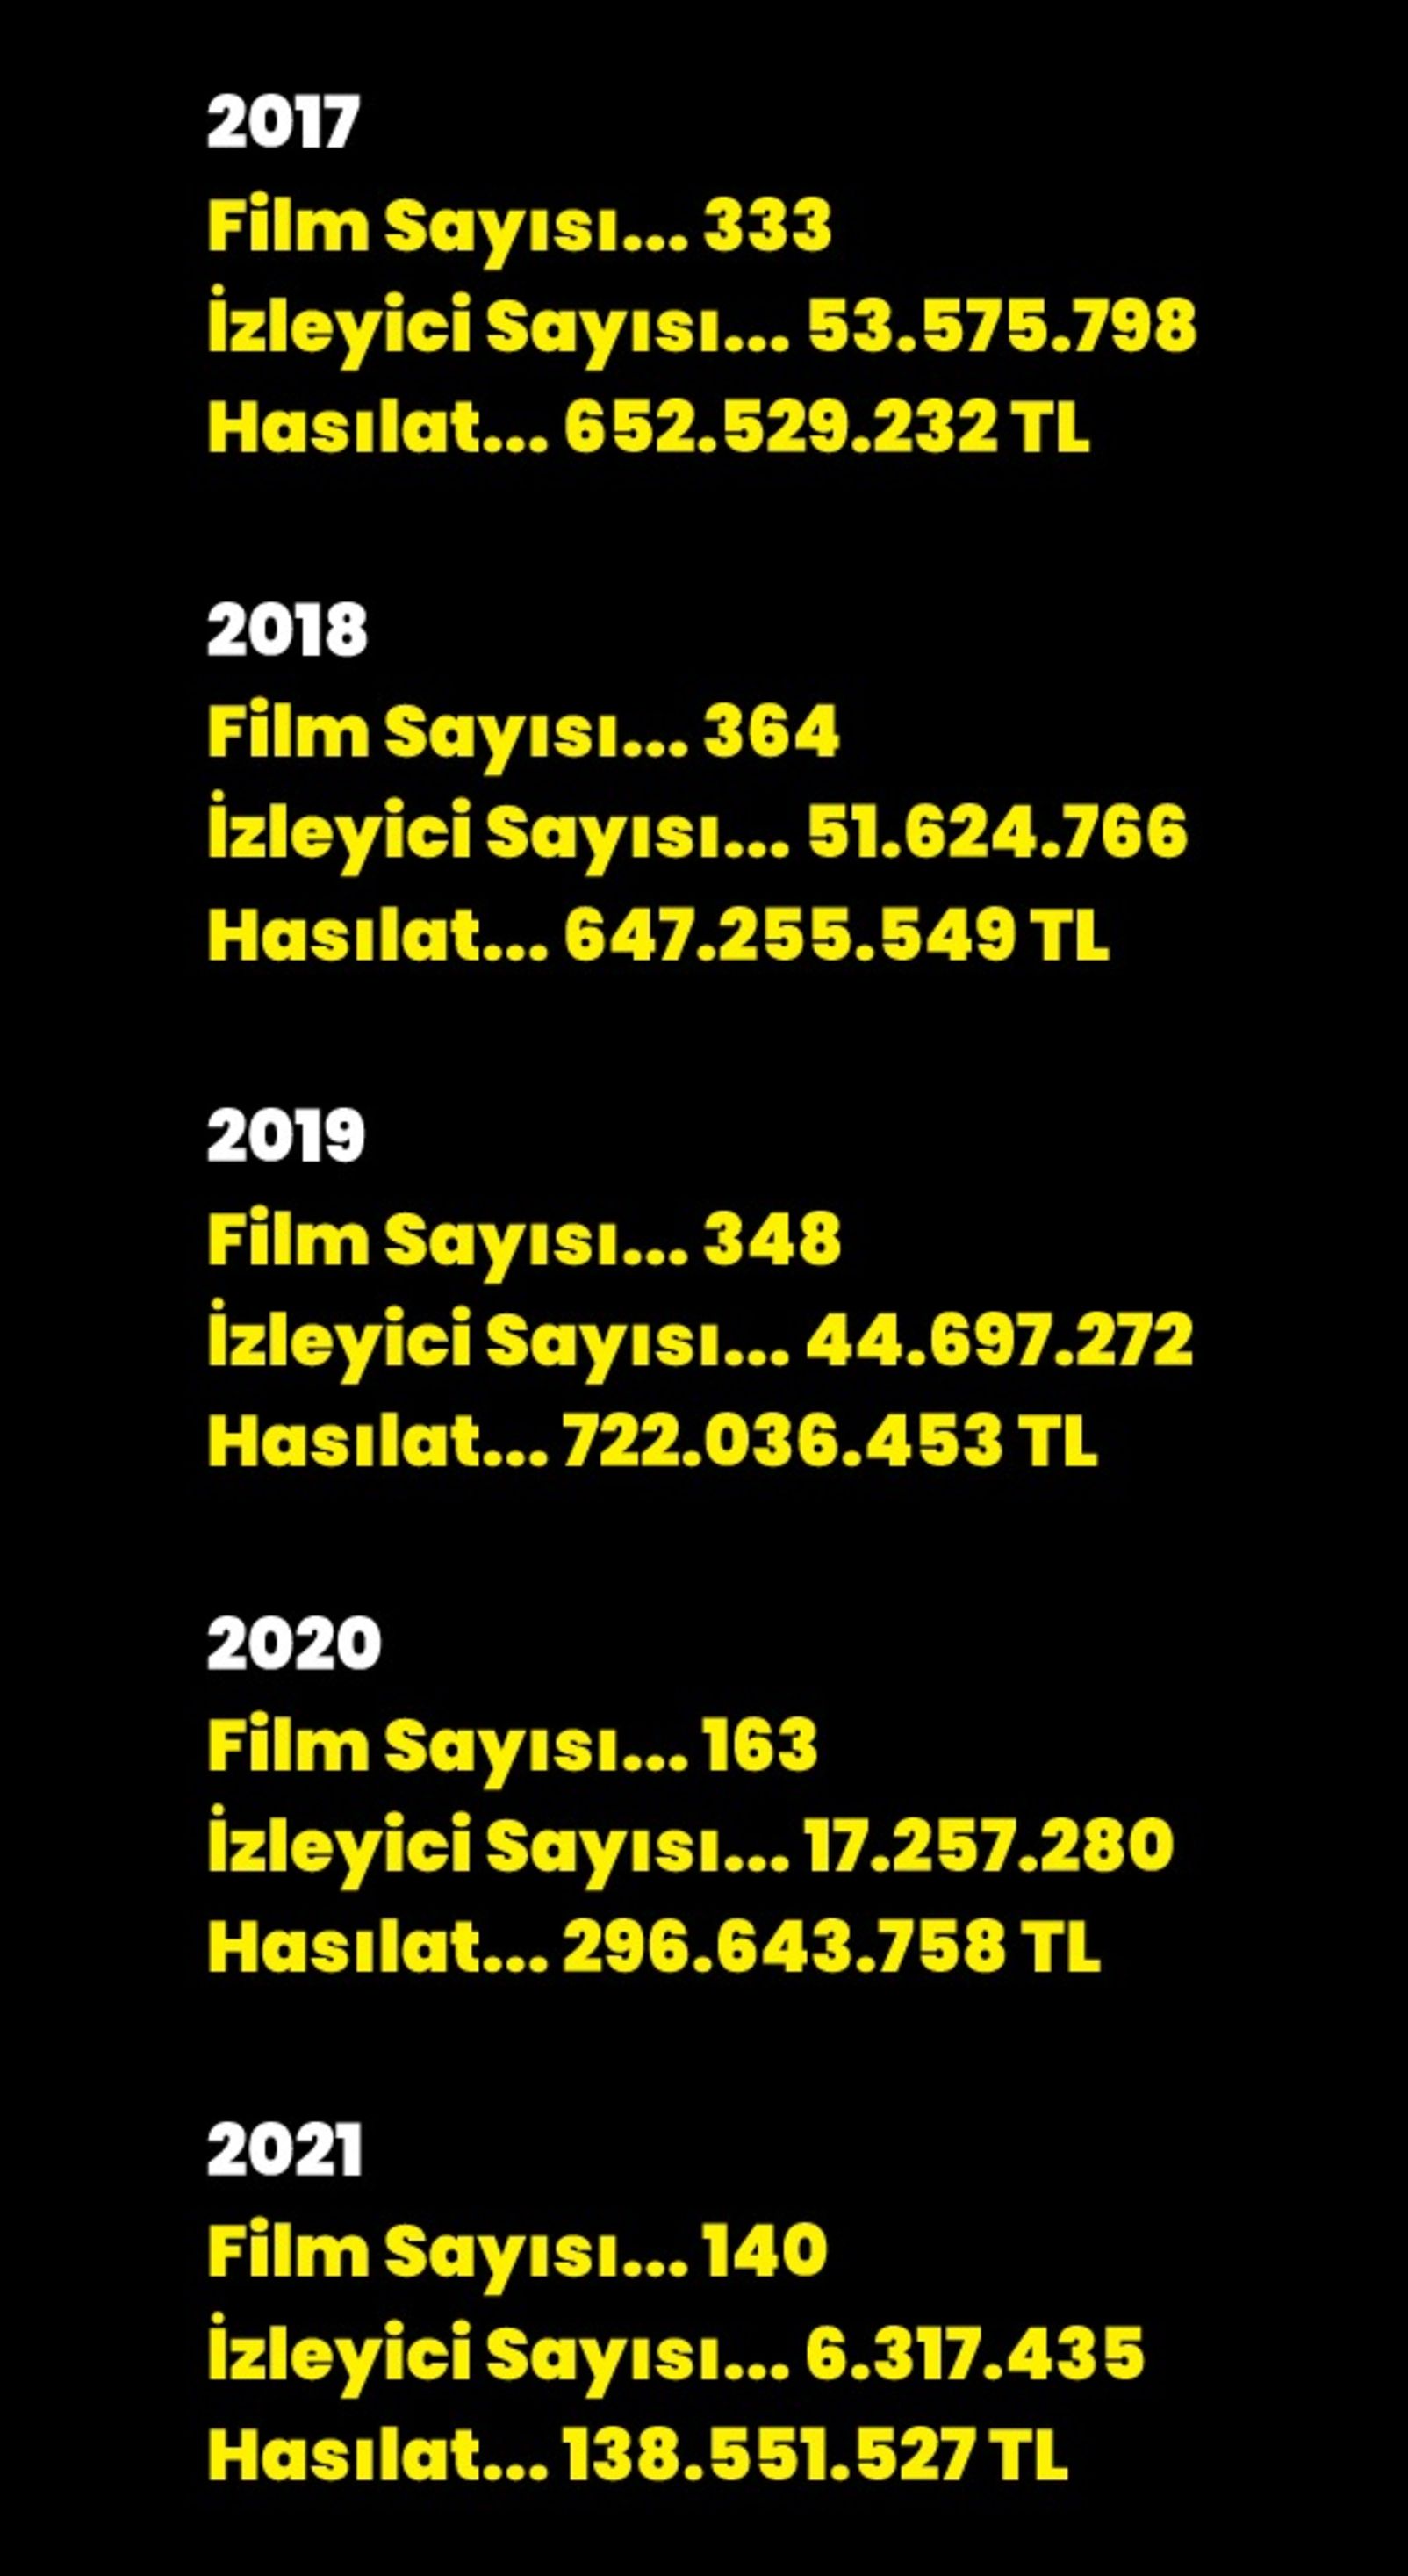 The audience numbers and revenues of the last 5 years in cinemas 